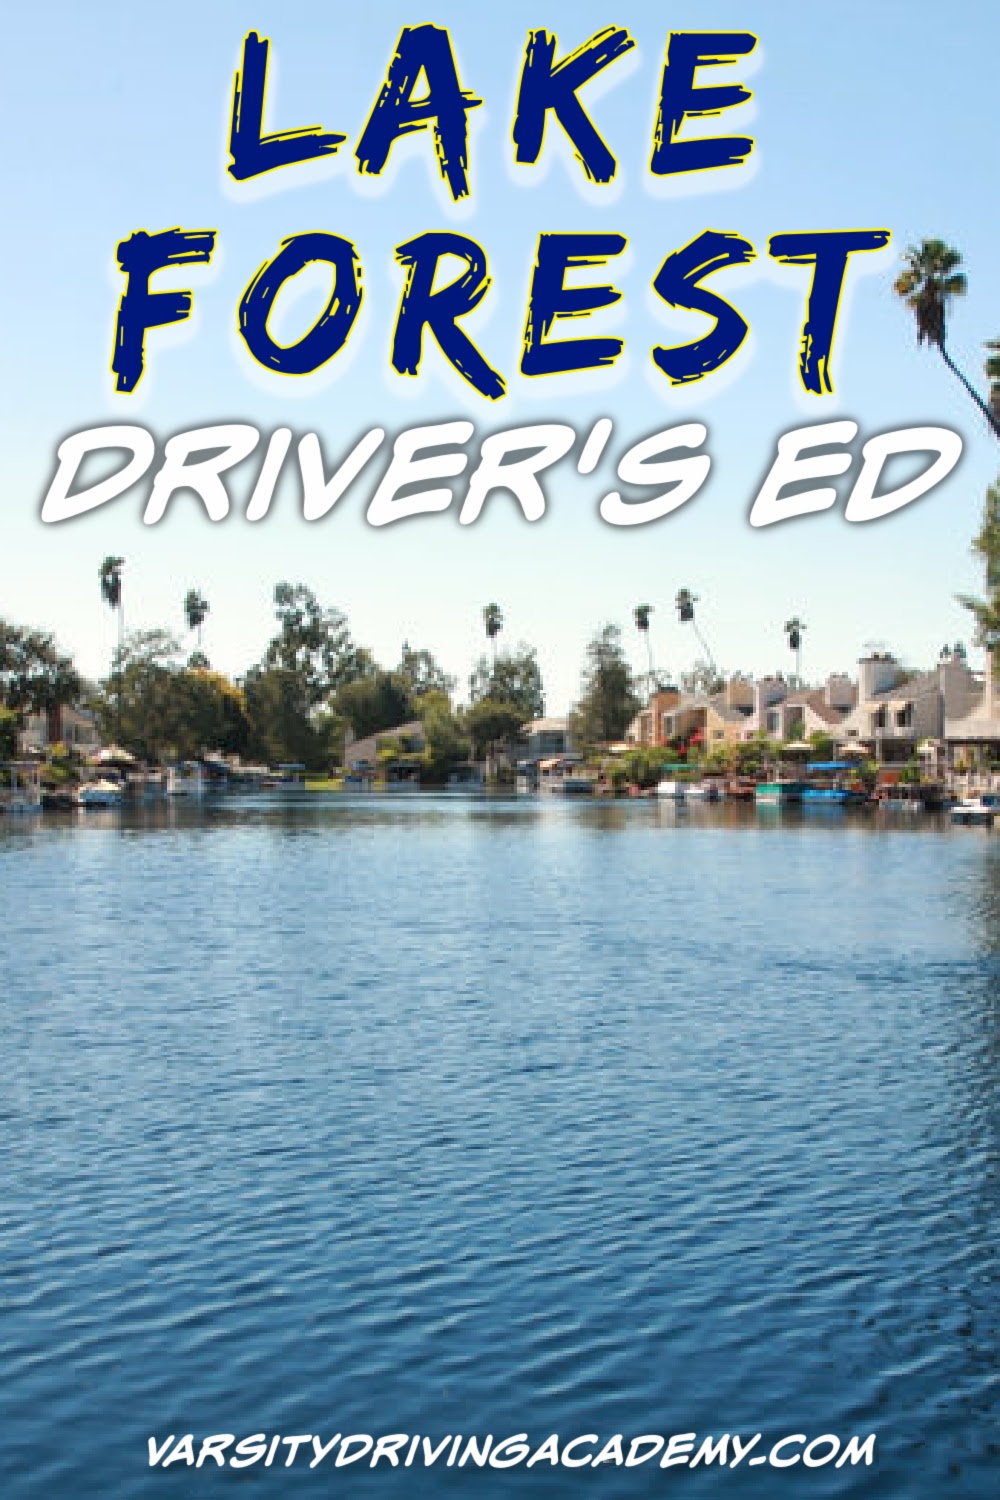 Varsity Driving Academy is the best Lake Forest drivers ed for teens and adults. You can learn about the services at the best driving school in Lake Forest and learn how to drive today.